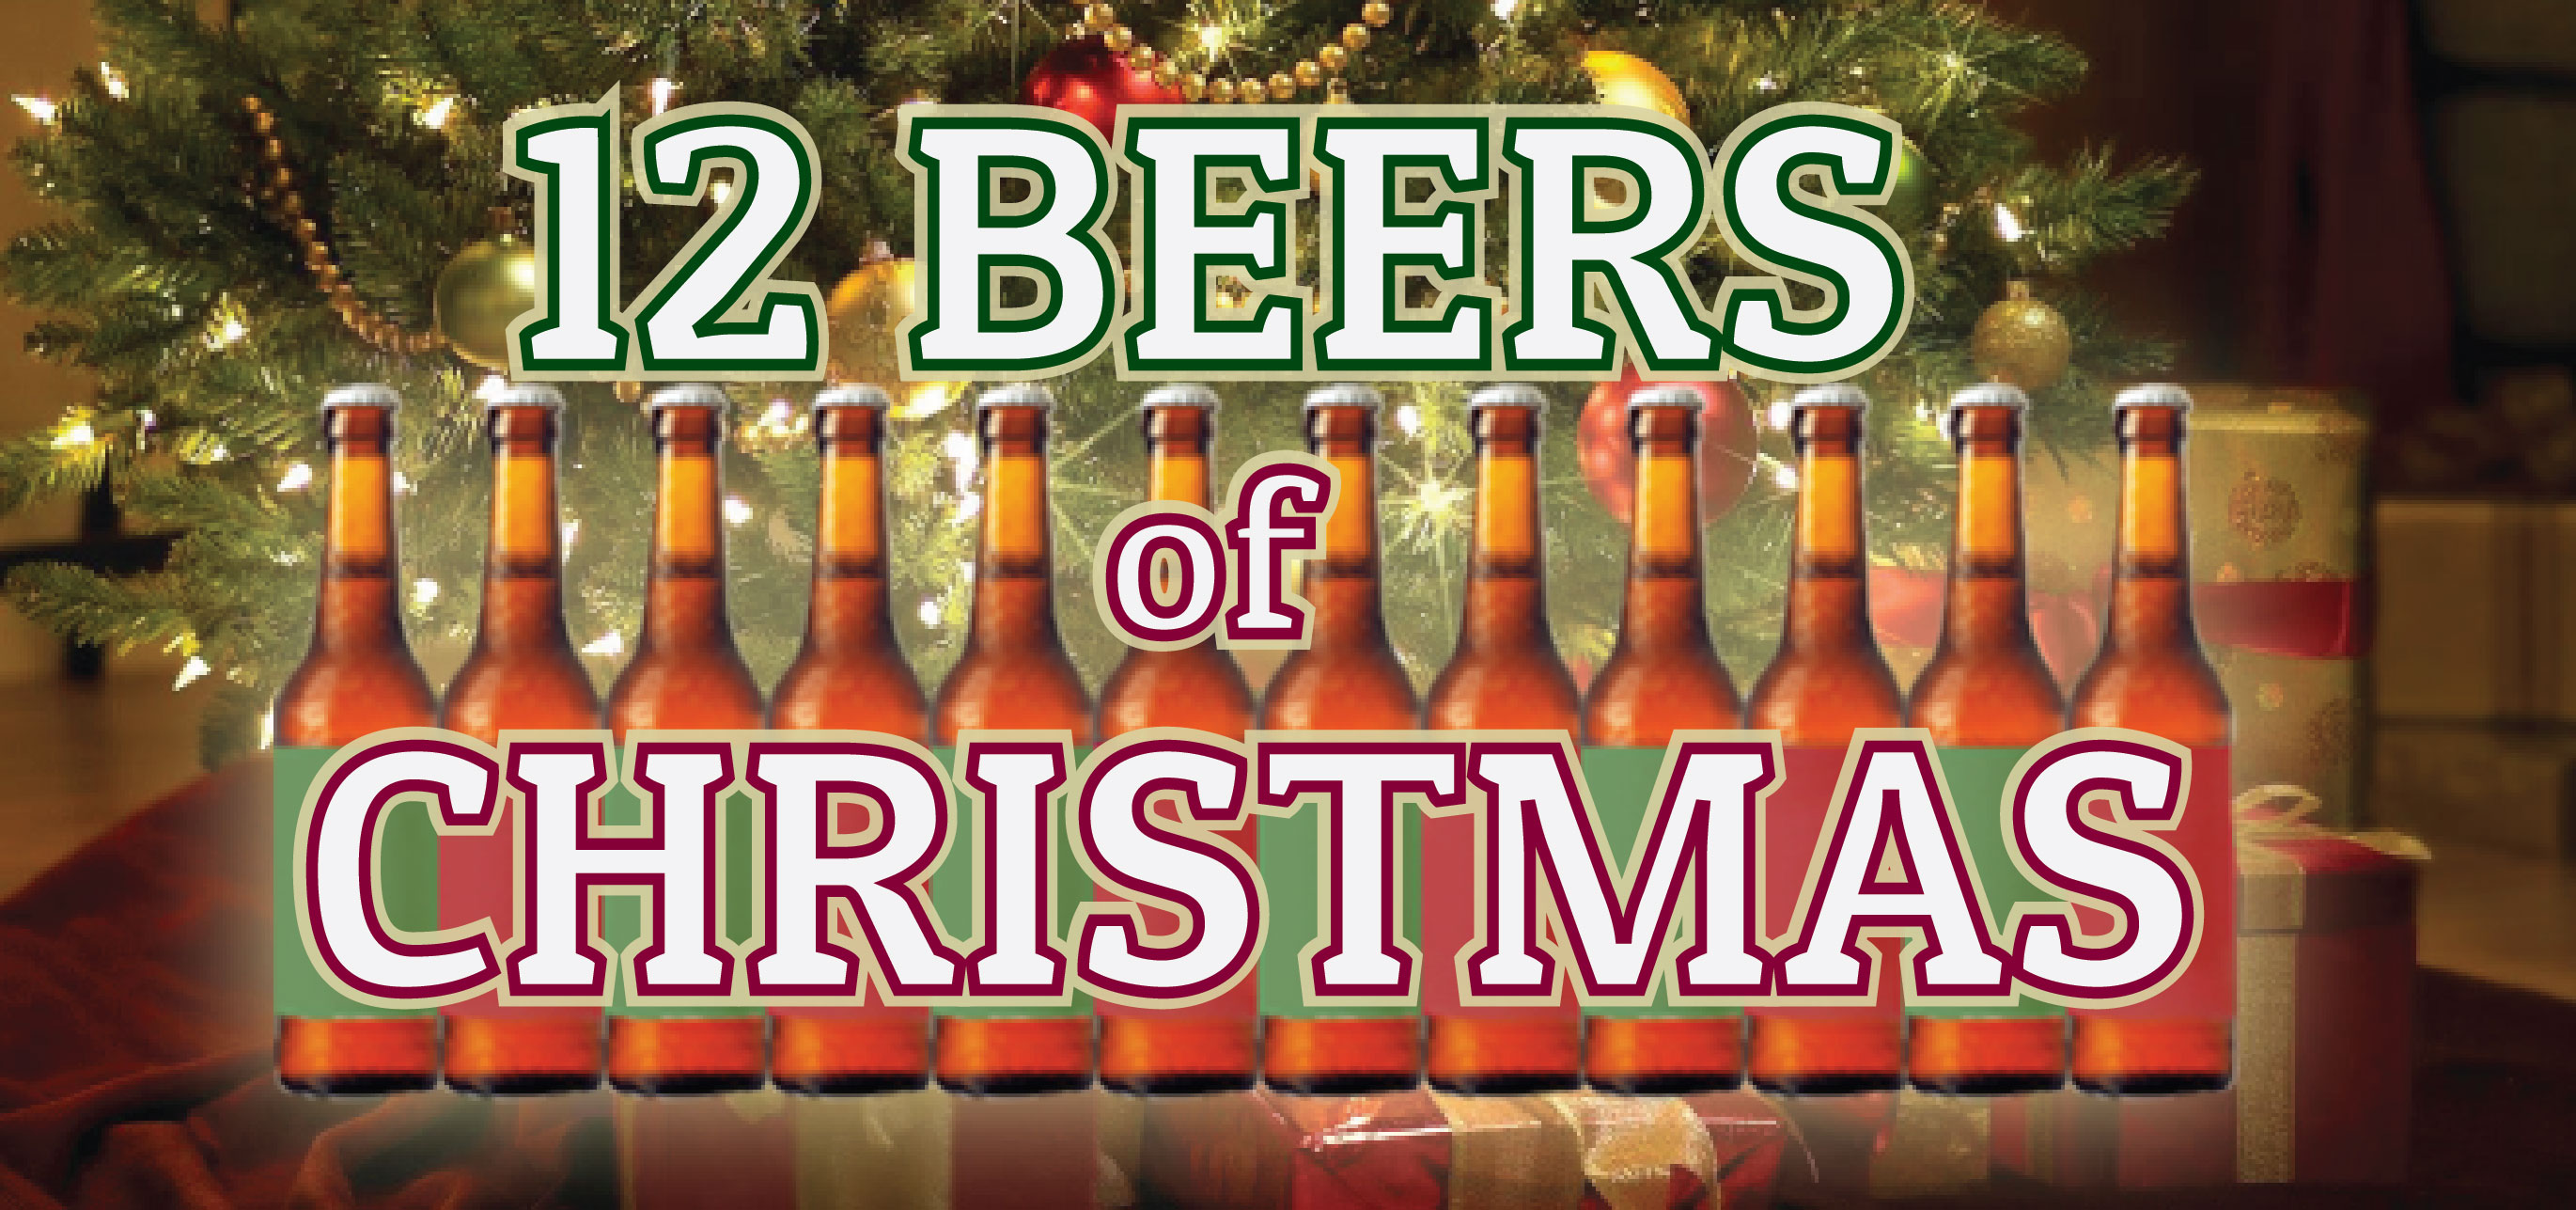 12 Beers of Christmas Day 3 | Schlafly Special Release Christmas Ale